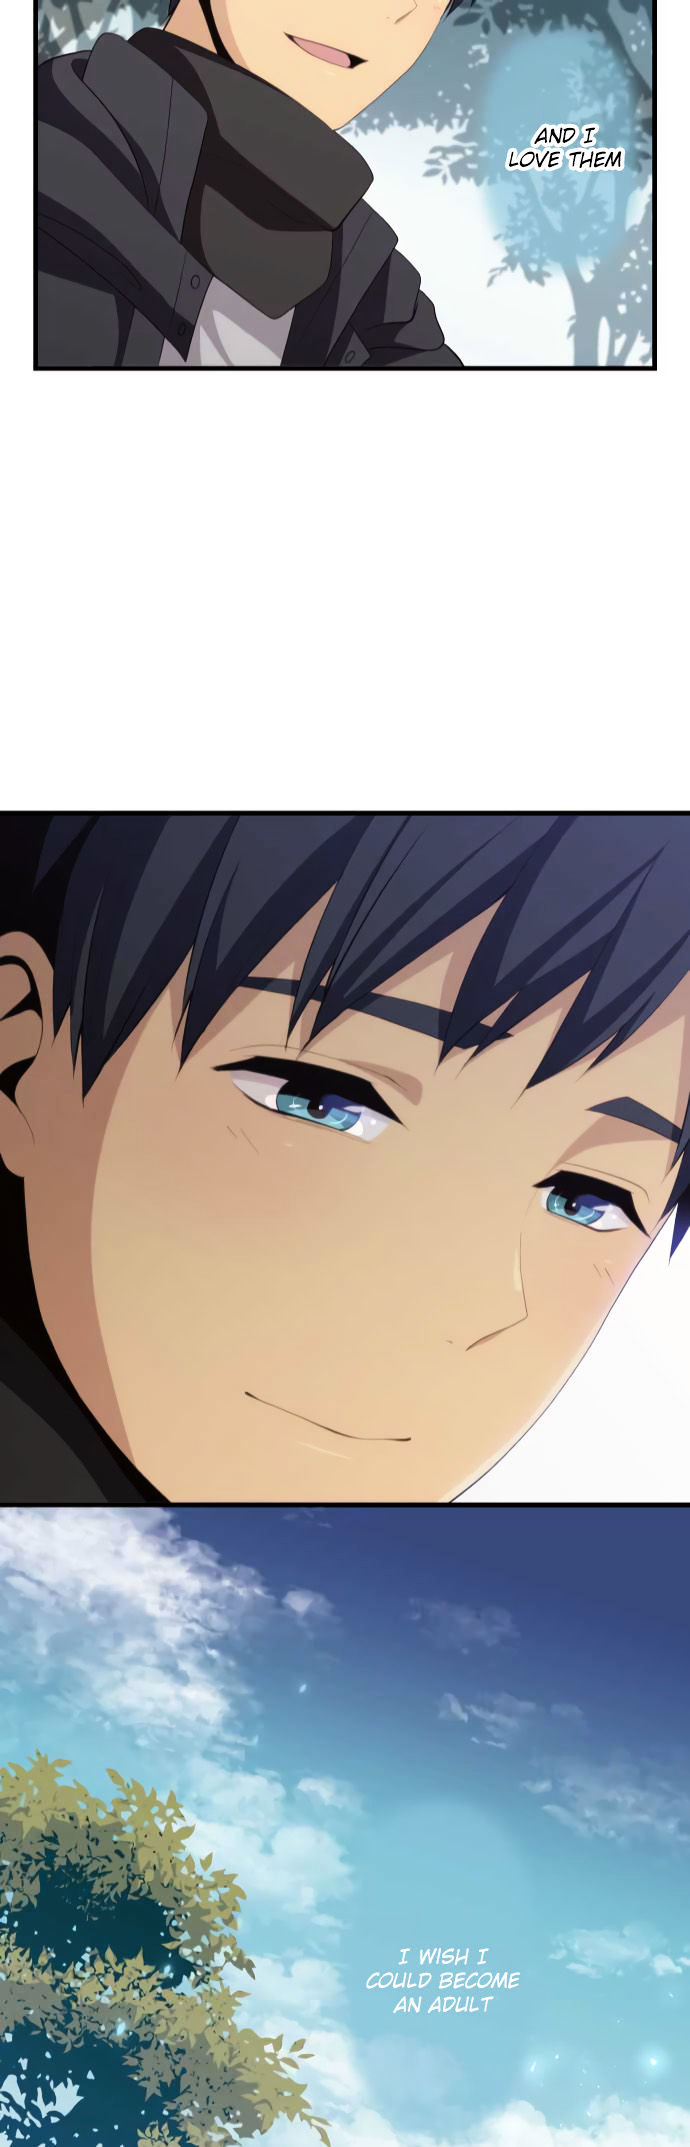 Relife 202 22